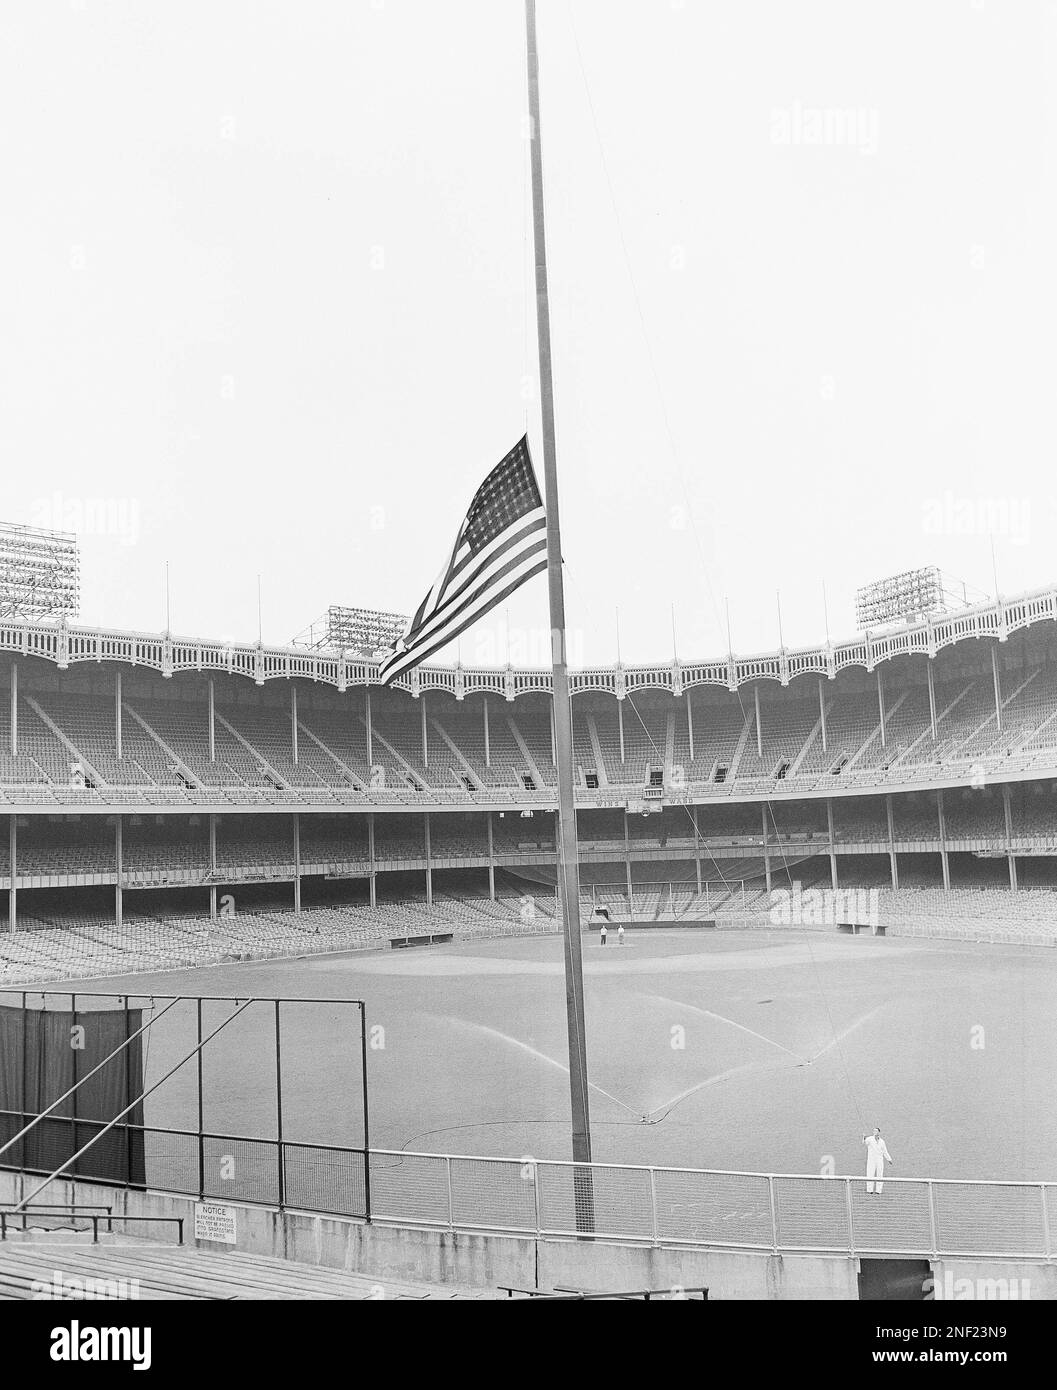 https://c8.alamy.com/comp/2NF23N9/at-attendant-at-yankee-stadium-new-york-lowers-the-american-flag-to-half-mast-in-deep-center-field-august-17-1948-in-honor-of-babe-ruth-who-died-in-new-yorks-memorial-hospital-on-august-16-of-throat-cancer-his-body-will-lie-in-state-in-the-rotunda-of-the-stadium-the-house-that-ruth-built-from-august-17-to-august-18-the-mighty-sluggers-funeral-is-scheduled-to-be-held-on-aug-19-with-a-solemn-requiem-mass-in-st-patricks-cathedral-ap-photojohn-rooney-2NF23N9.jpg